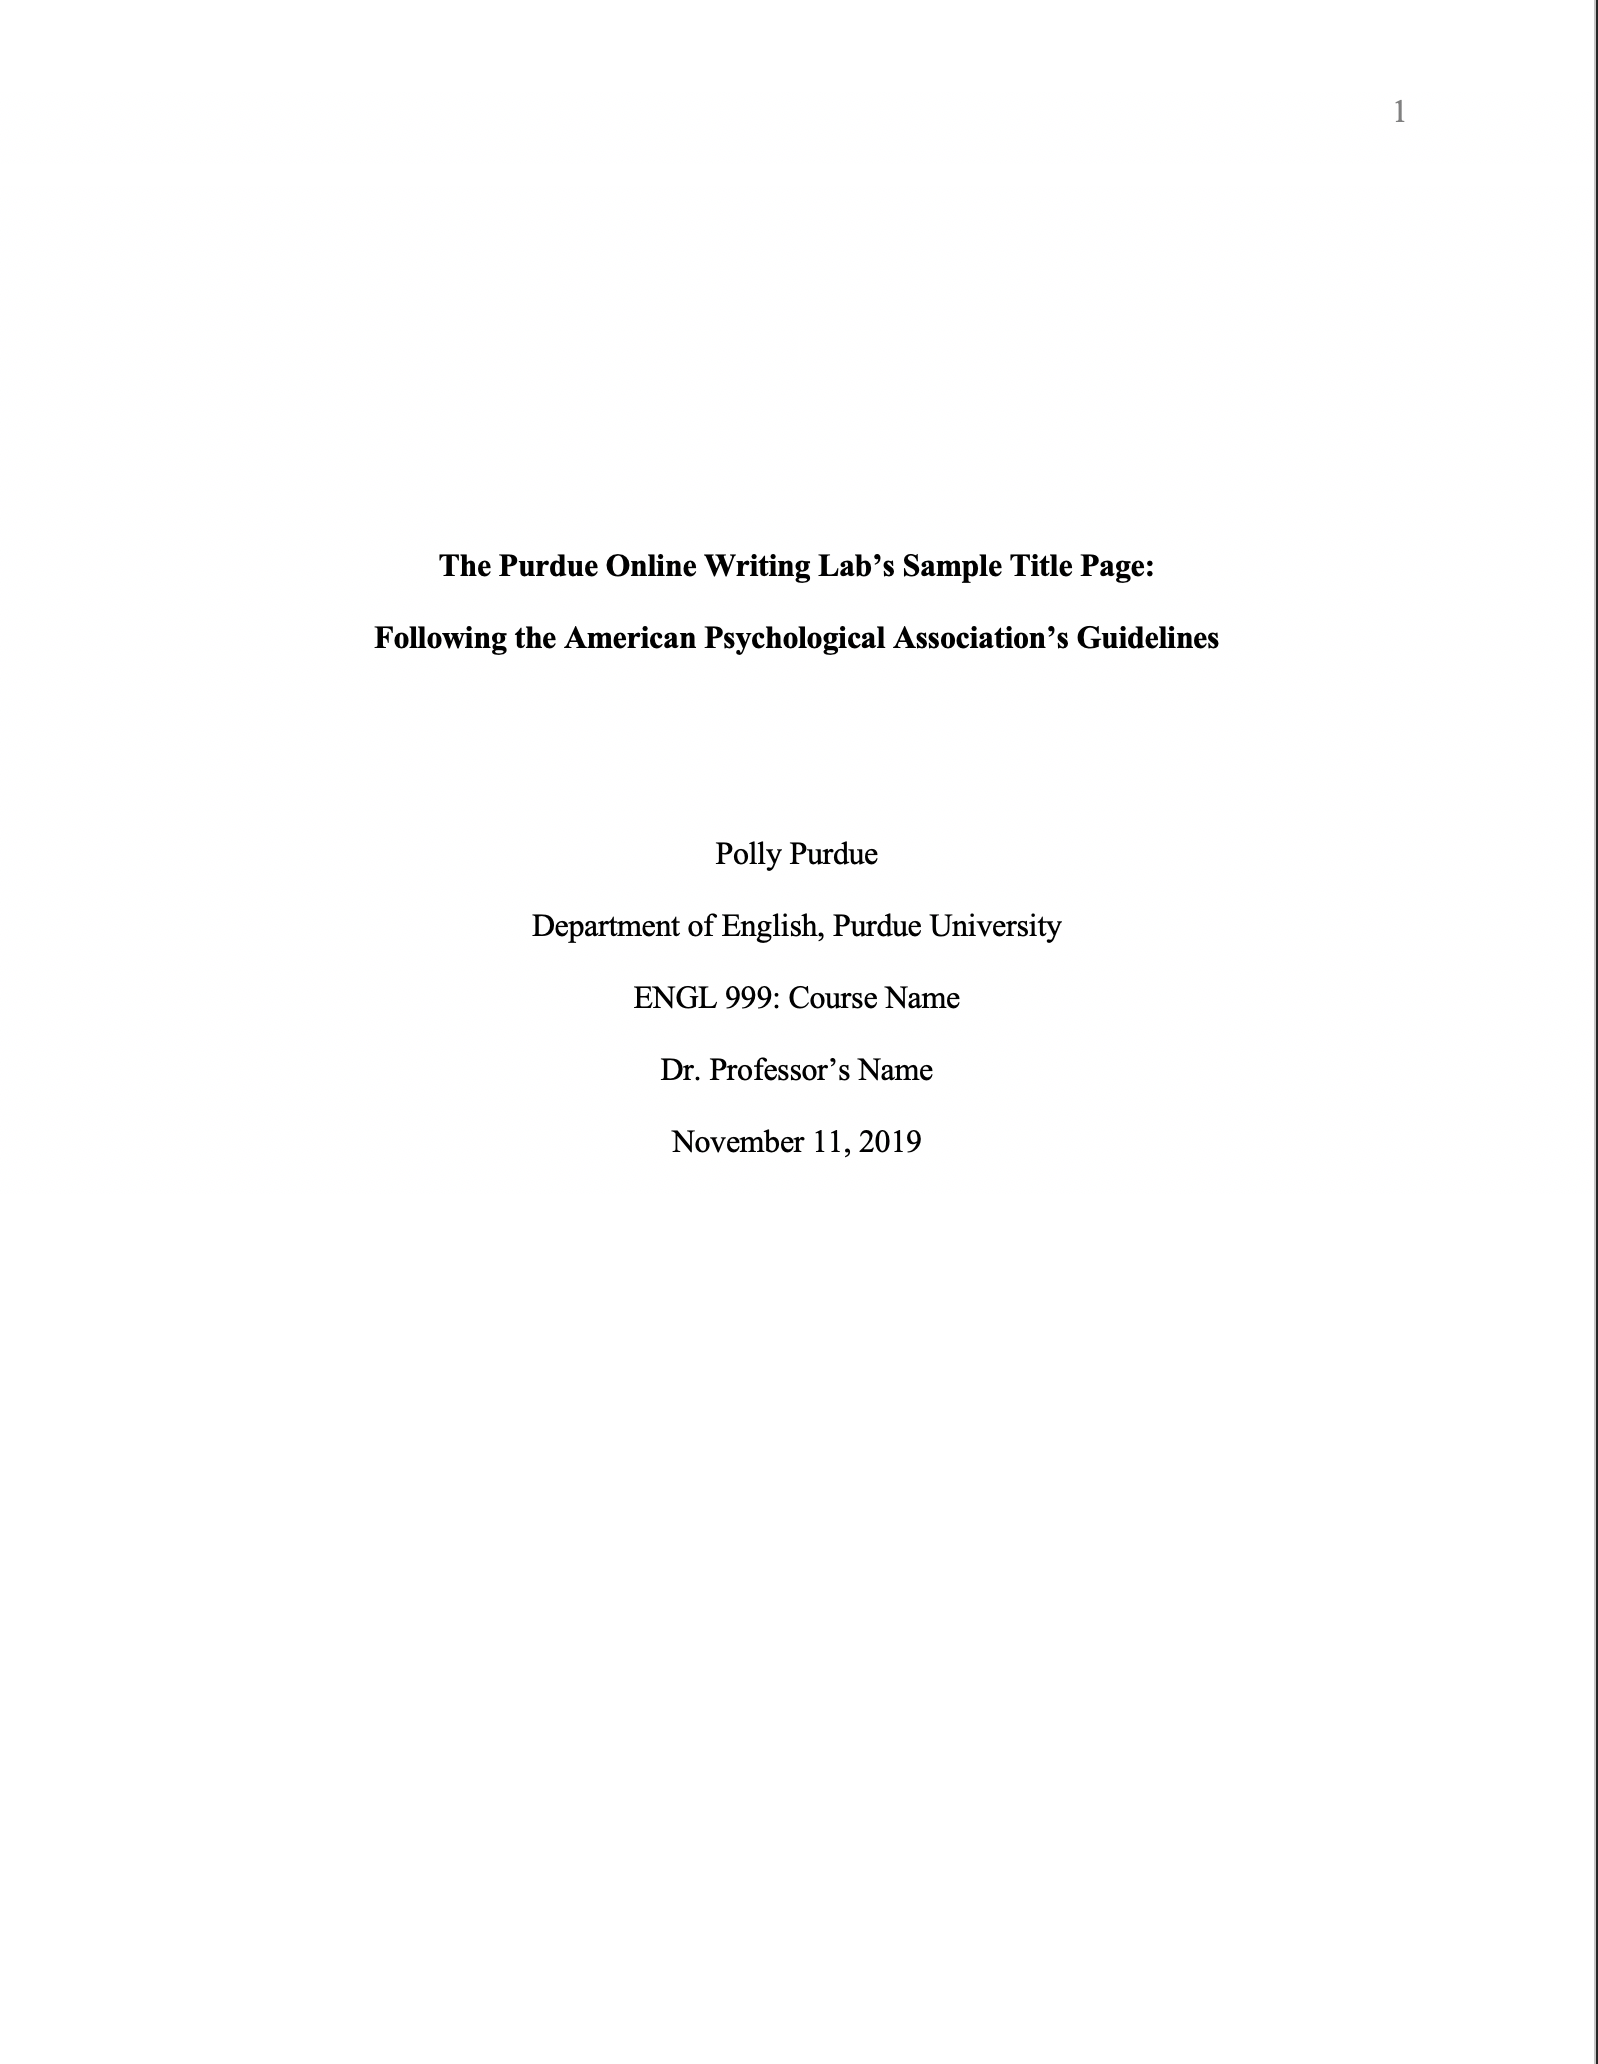 This image shows the title page for a student APA seventh edition paper.